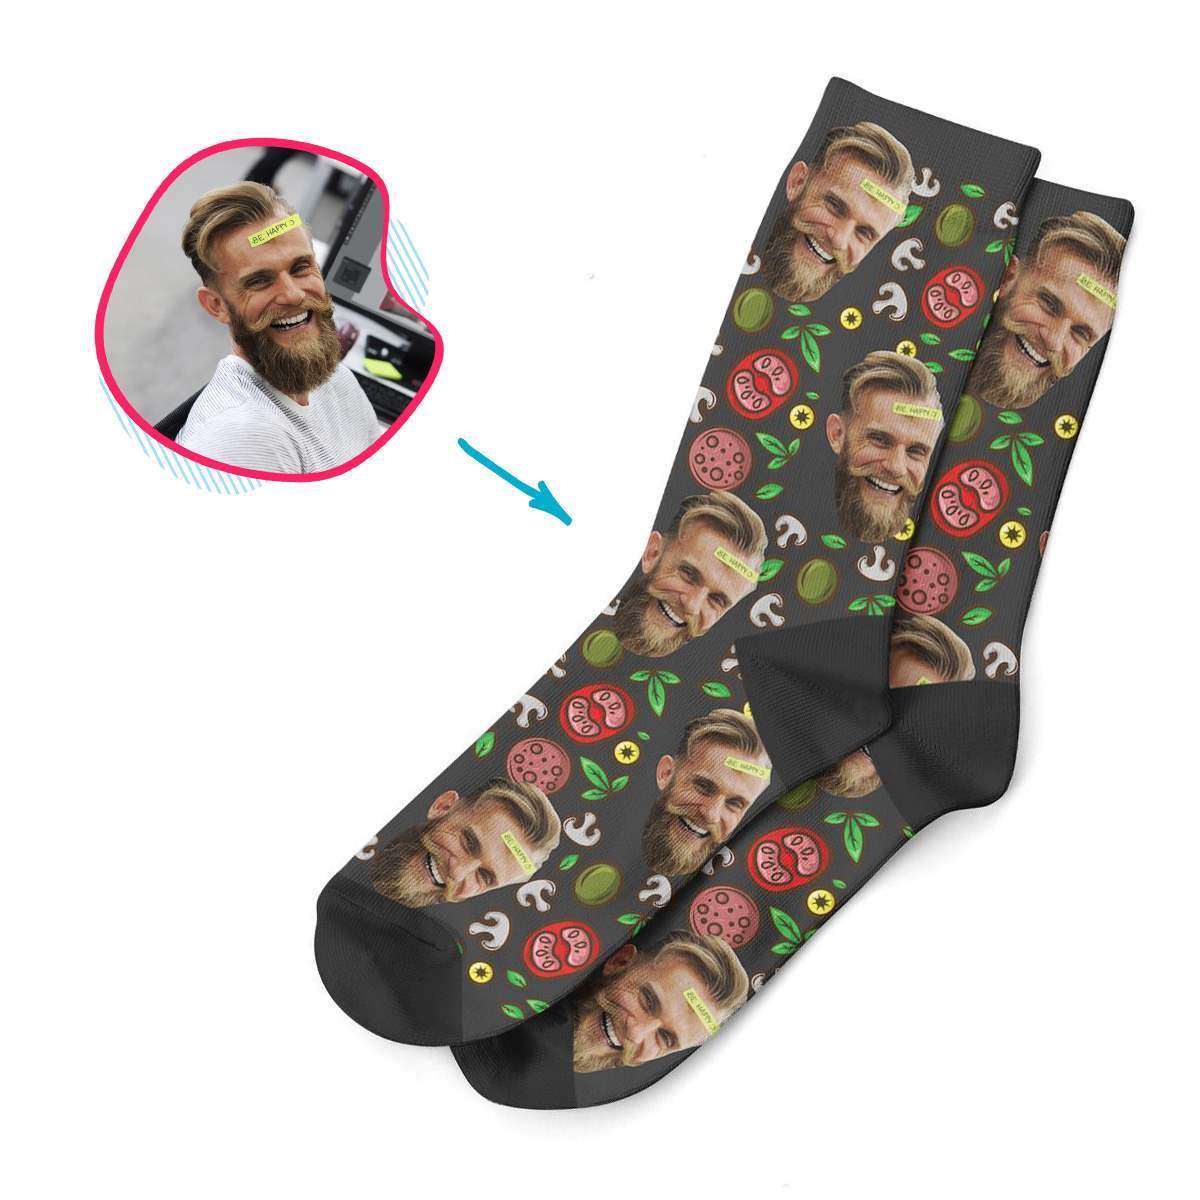 dark Pizza socks personalized with photo of face printed on them